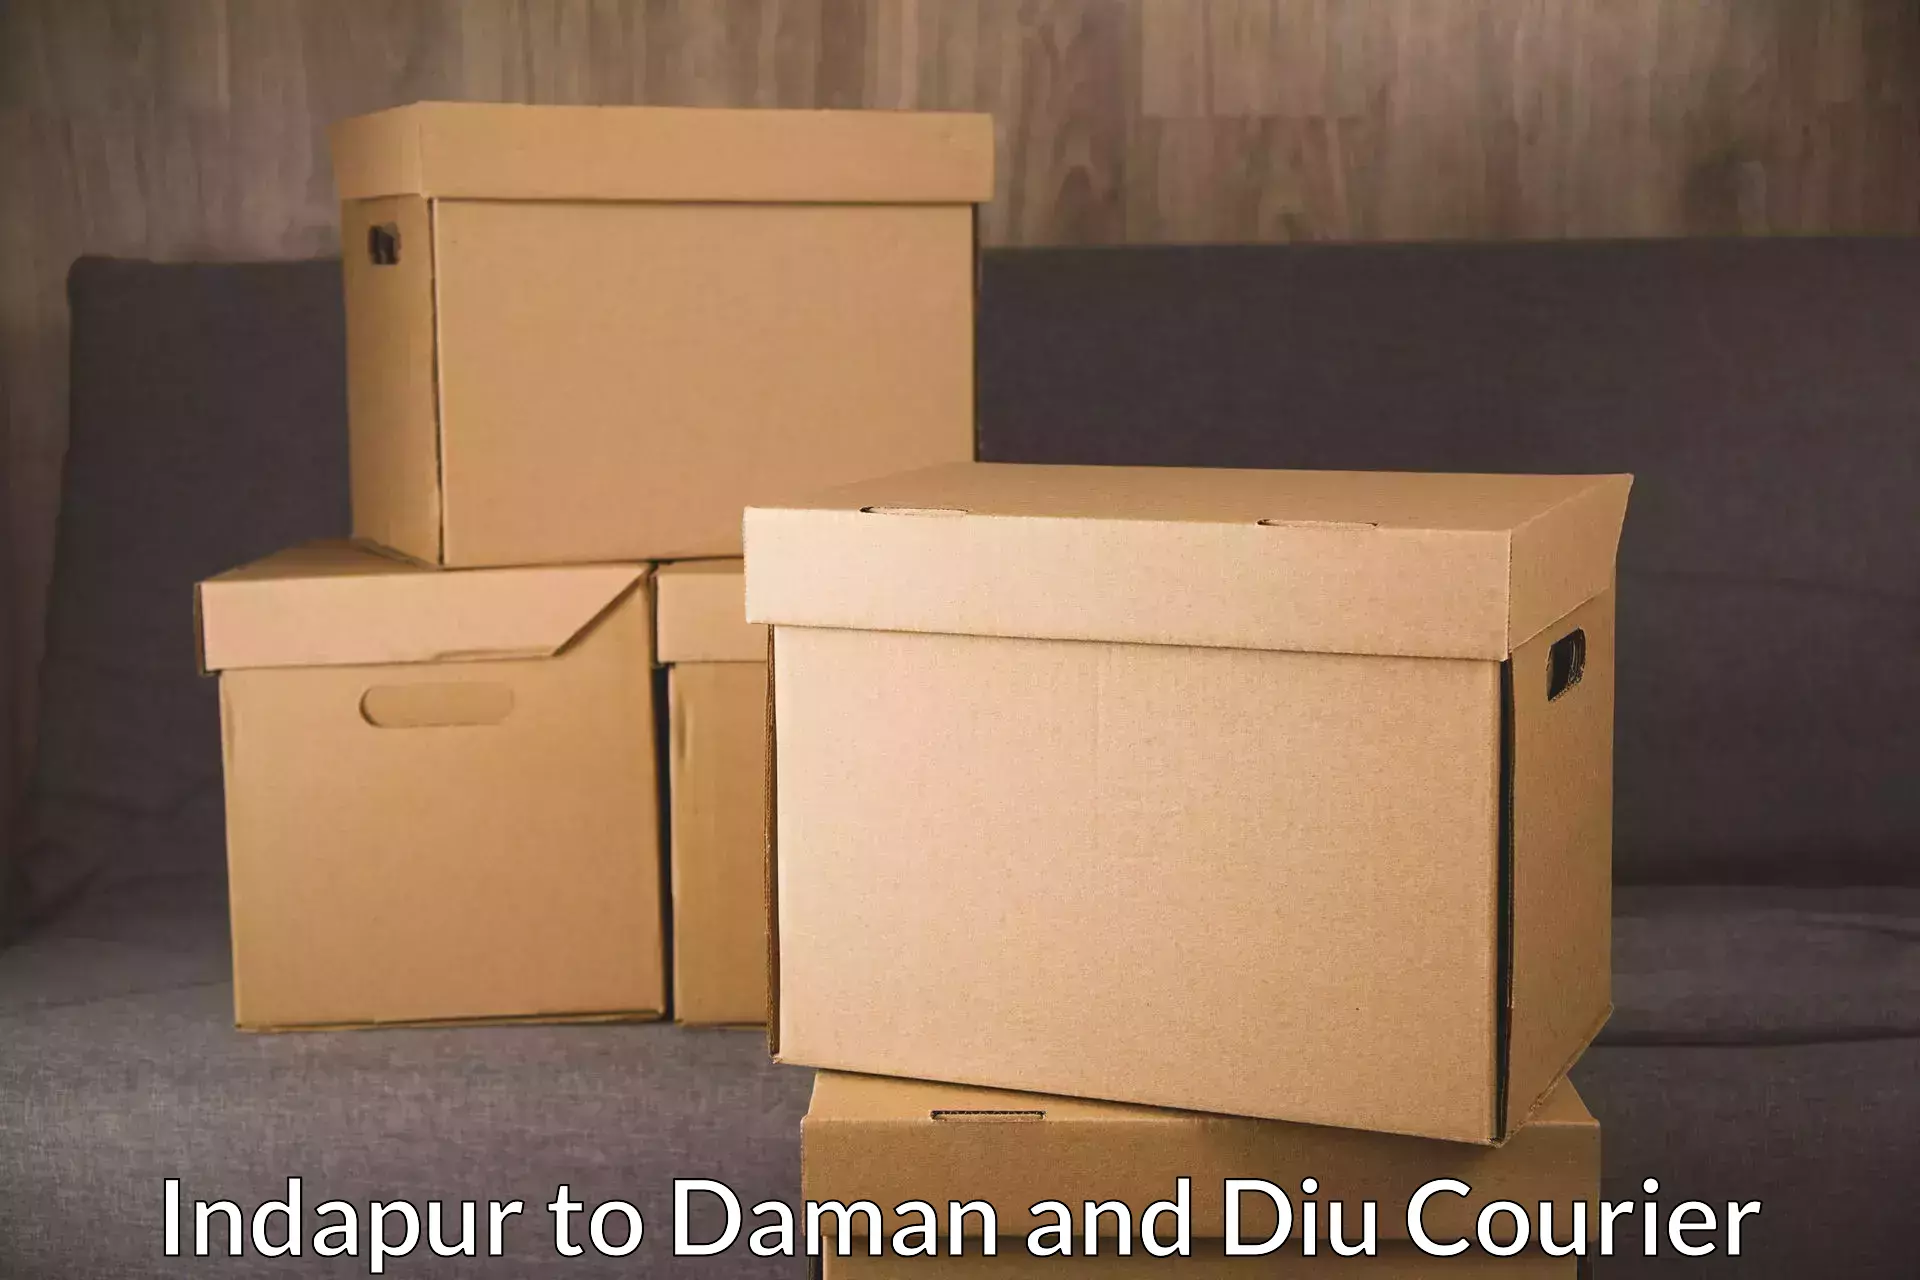 Nationwide shipping capabilities Indapur to Diu